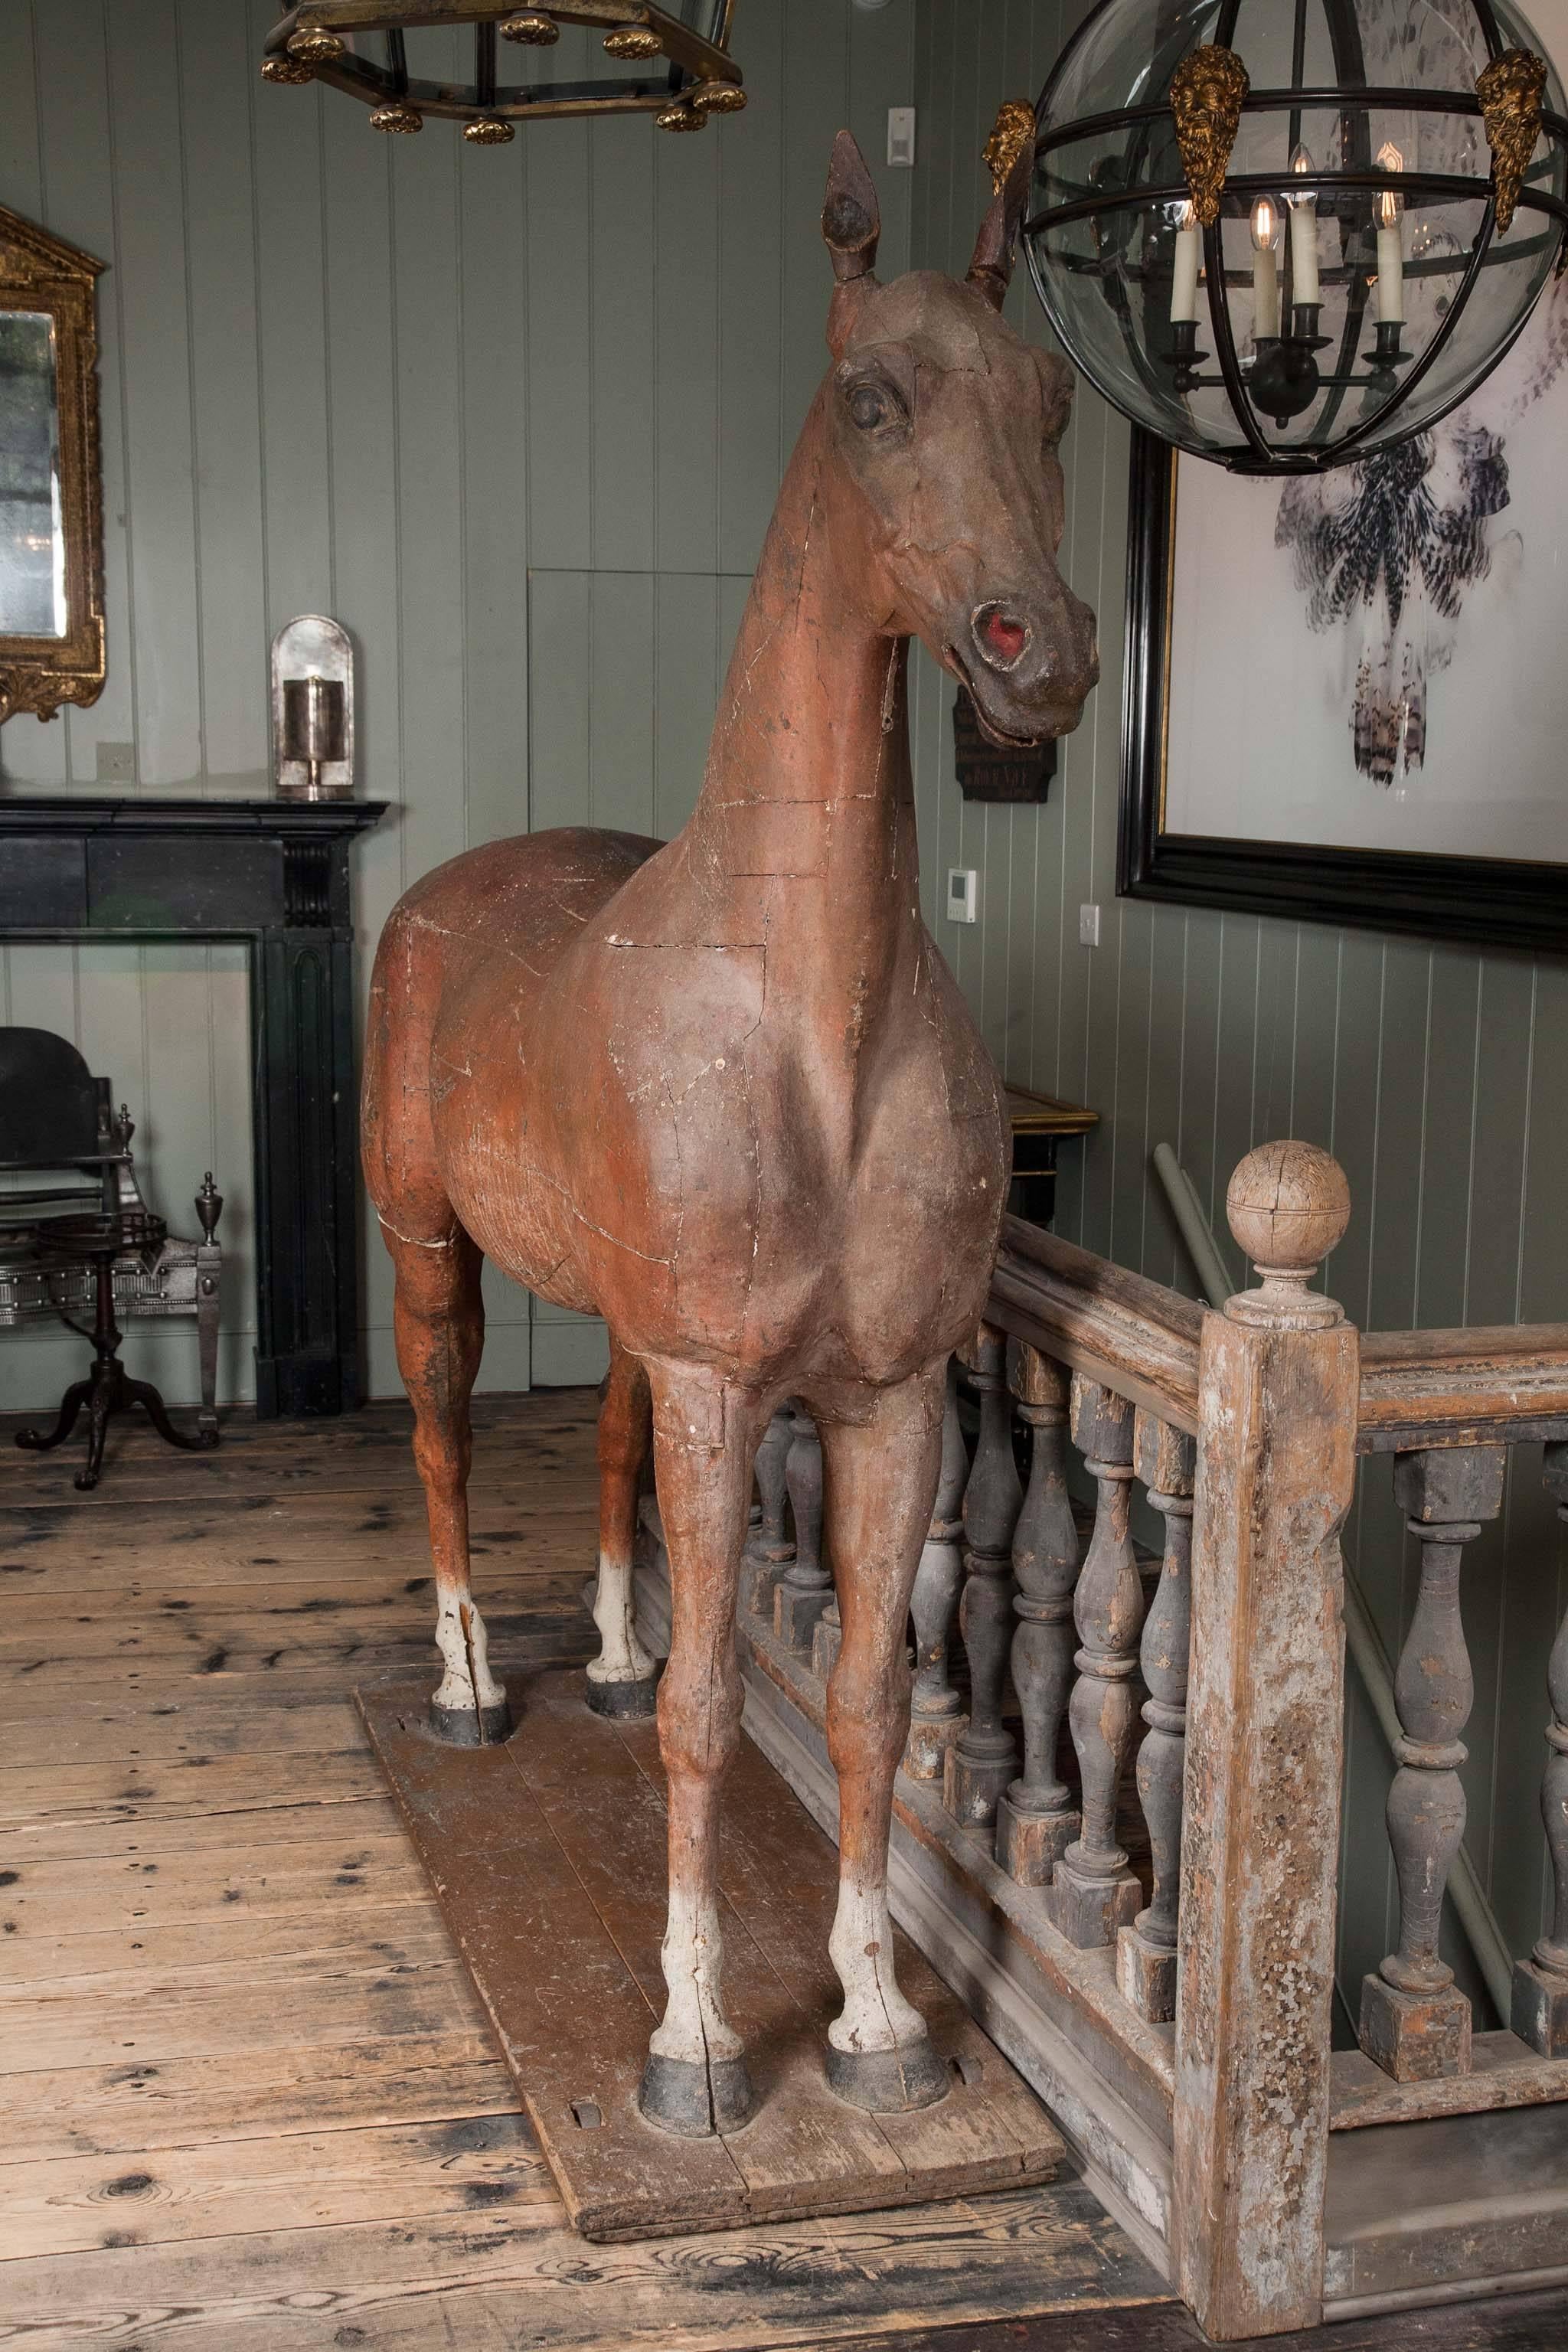 A late 18th-early 19th century full size wooden sculpture of a horse, with tail made from horse hair, resting on a rectangular wooden base mounted on four castors.